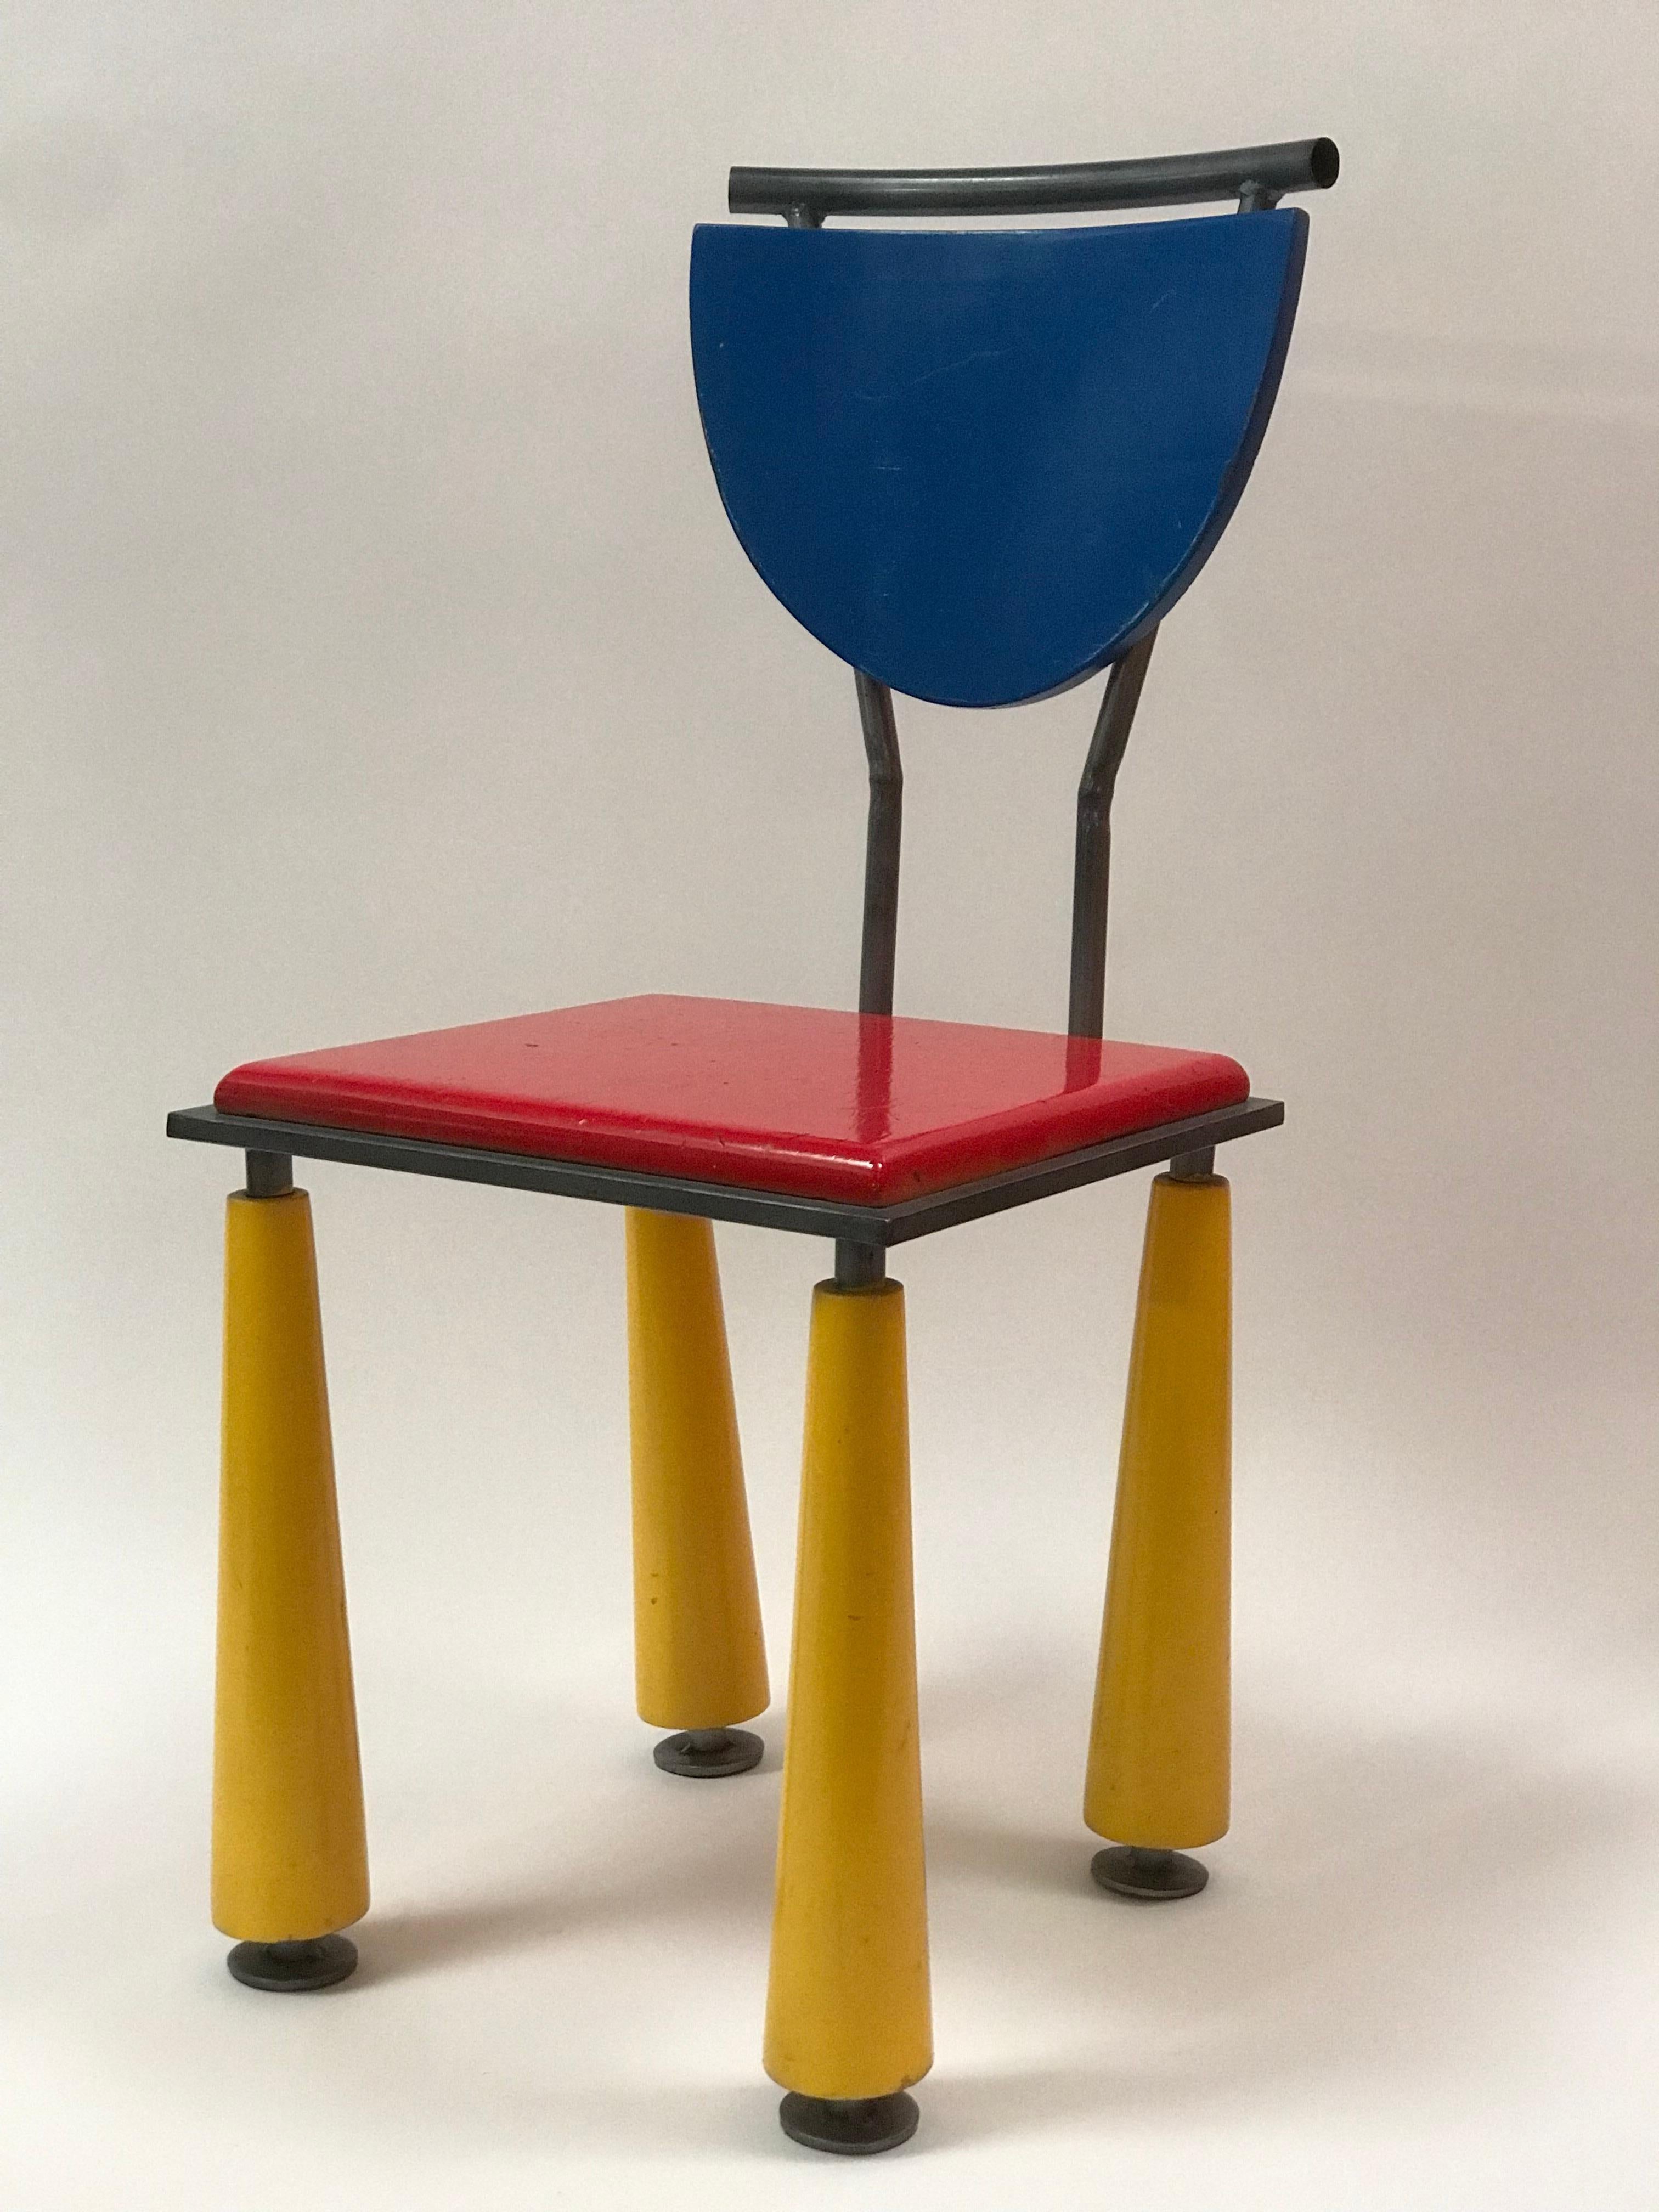 An of the period artist studio production sculptural side chair in the style of Memphis Group executed circa 1987 in gray fleck powder coated steel tubing frame with conical legs squared seat, shield form backrest and exaggerated handle. wooden